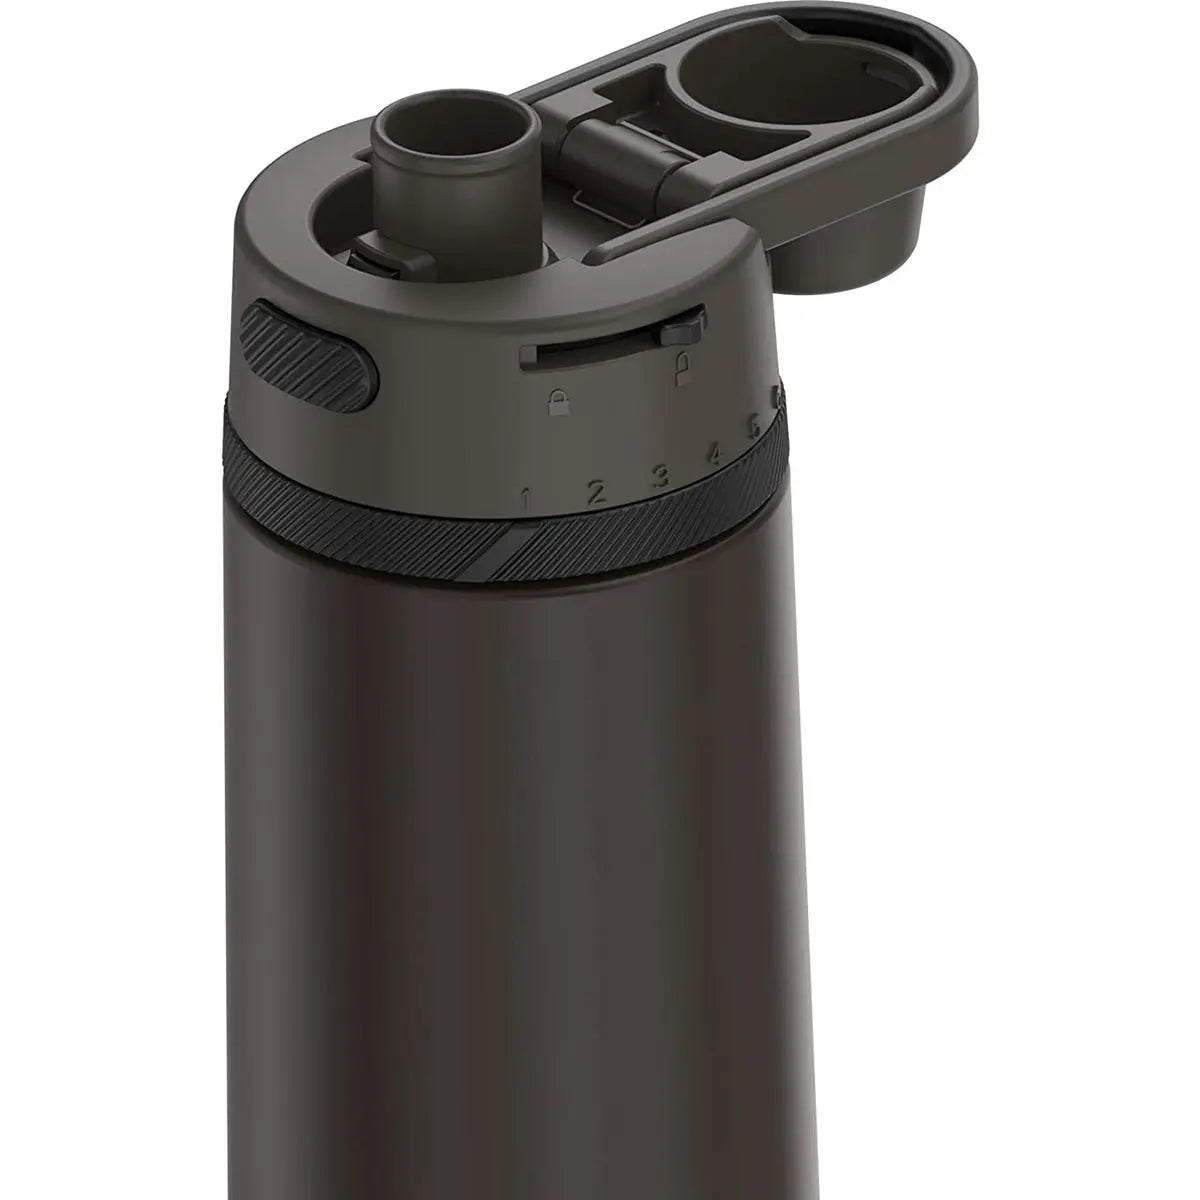 Thermos 24 oz. Alta Insulated Stainless Steel Hydration Bottle Thermos